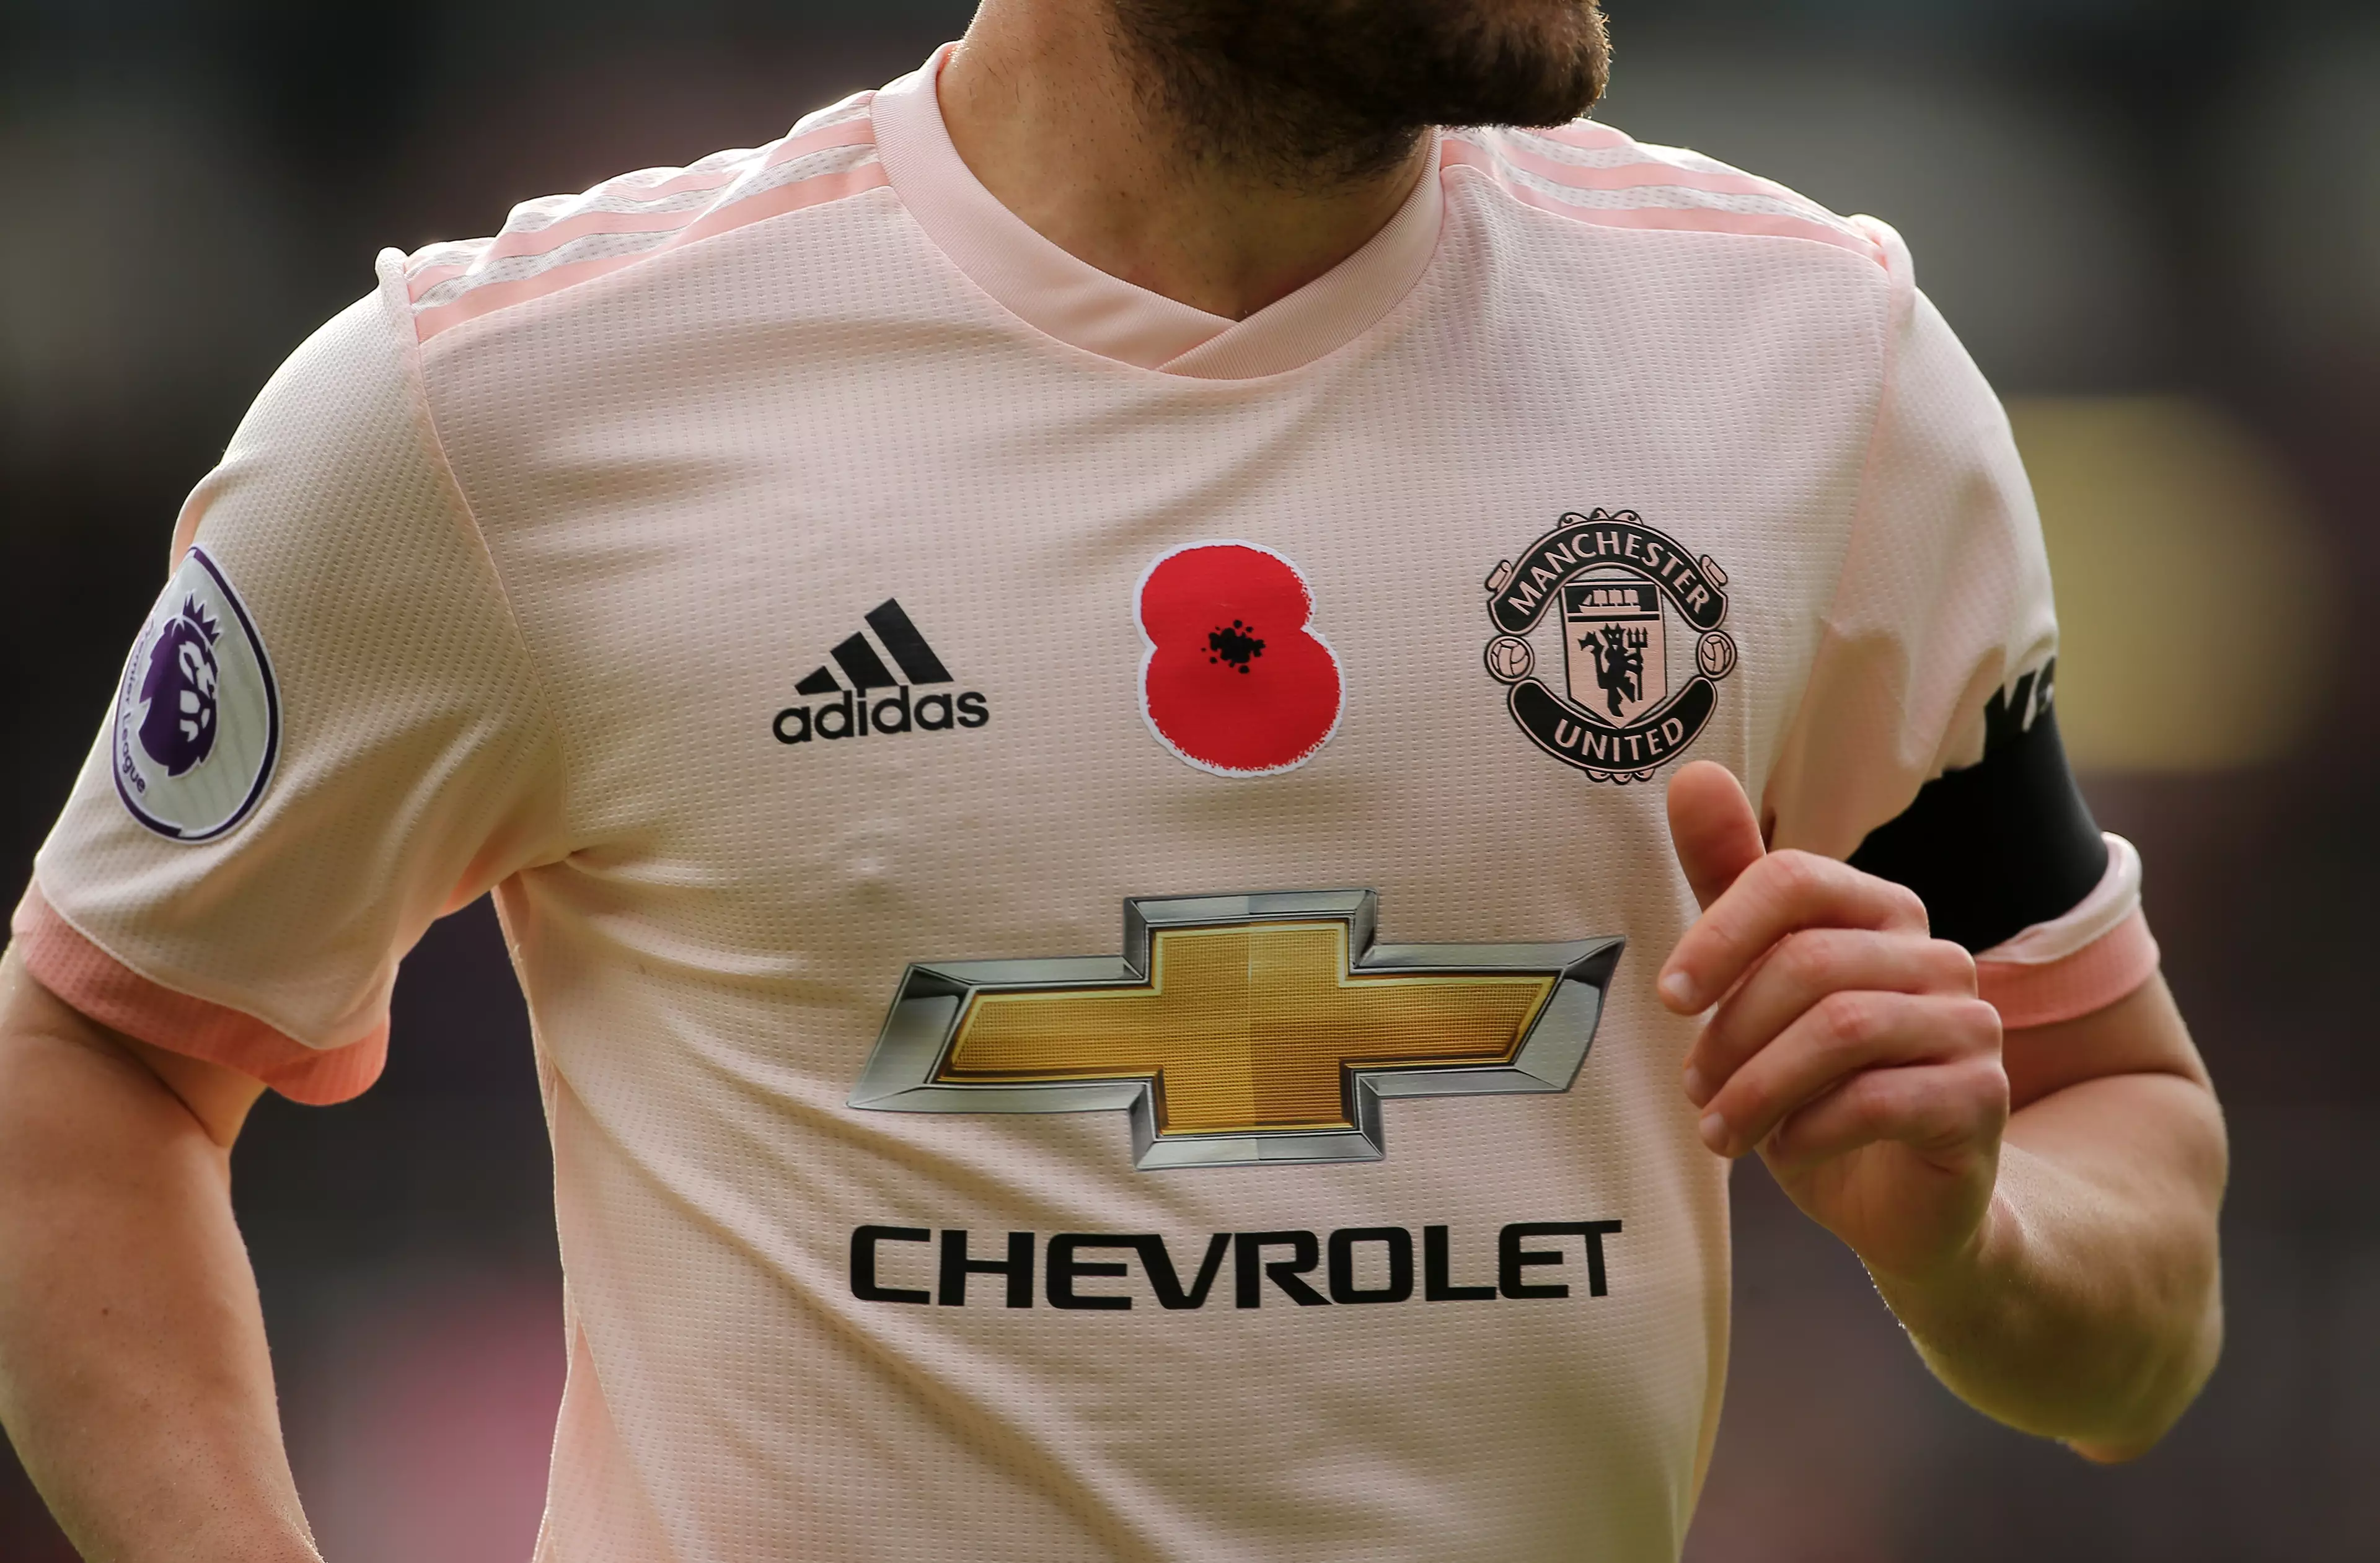 United's kit from Saturday. Image: PA Images